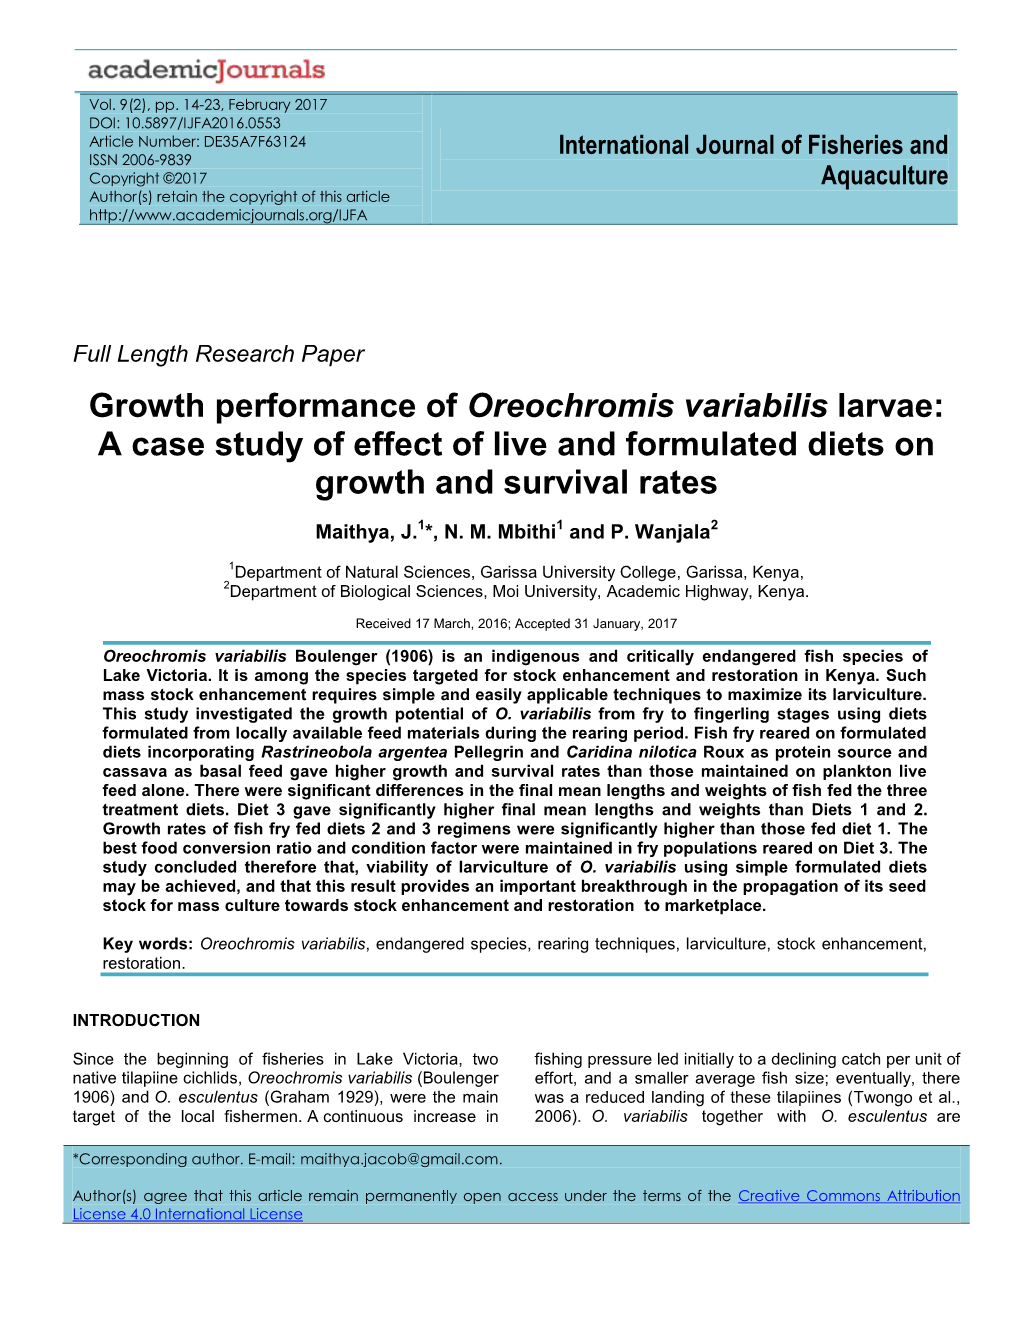 Growth Performance of Oreochromis Variabilis Larvae: a Case Study of Effect of Live and Formulated Diets on Growth and Survival Rates